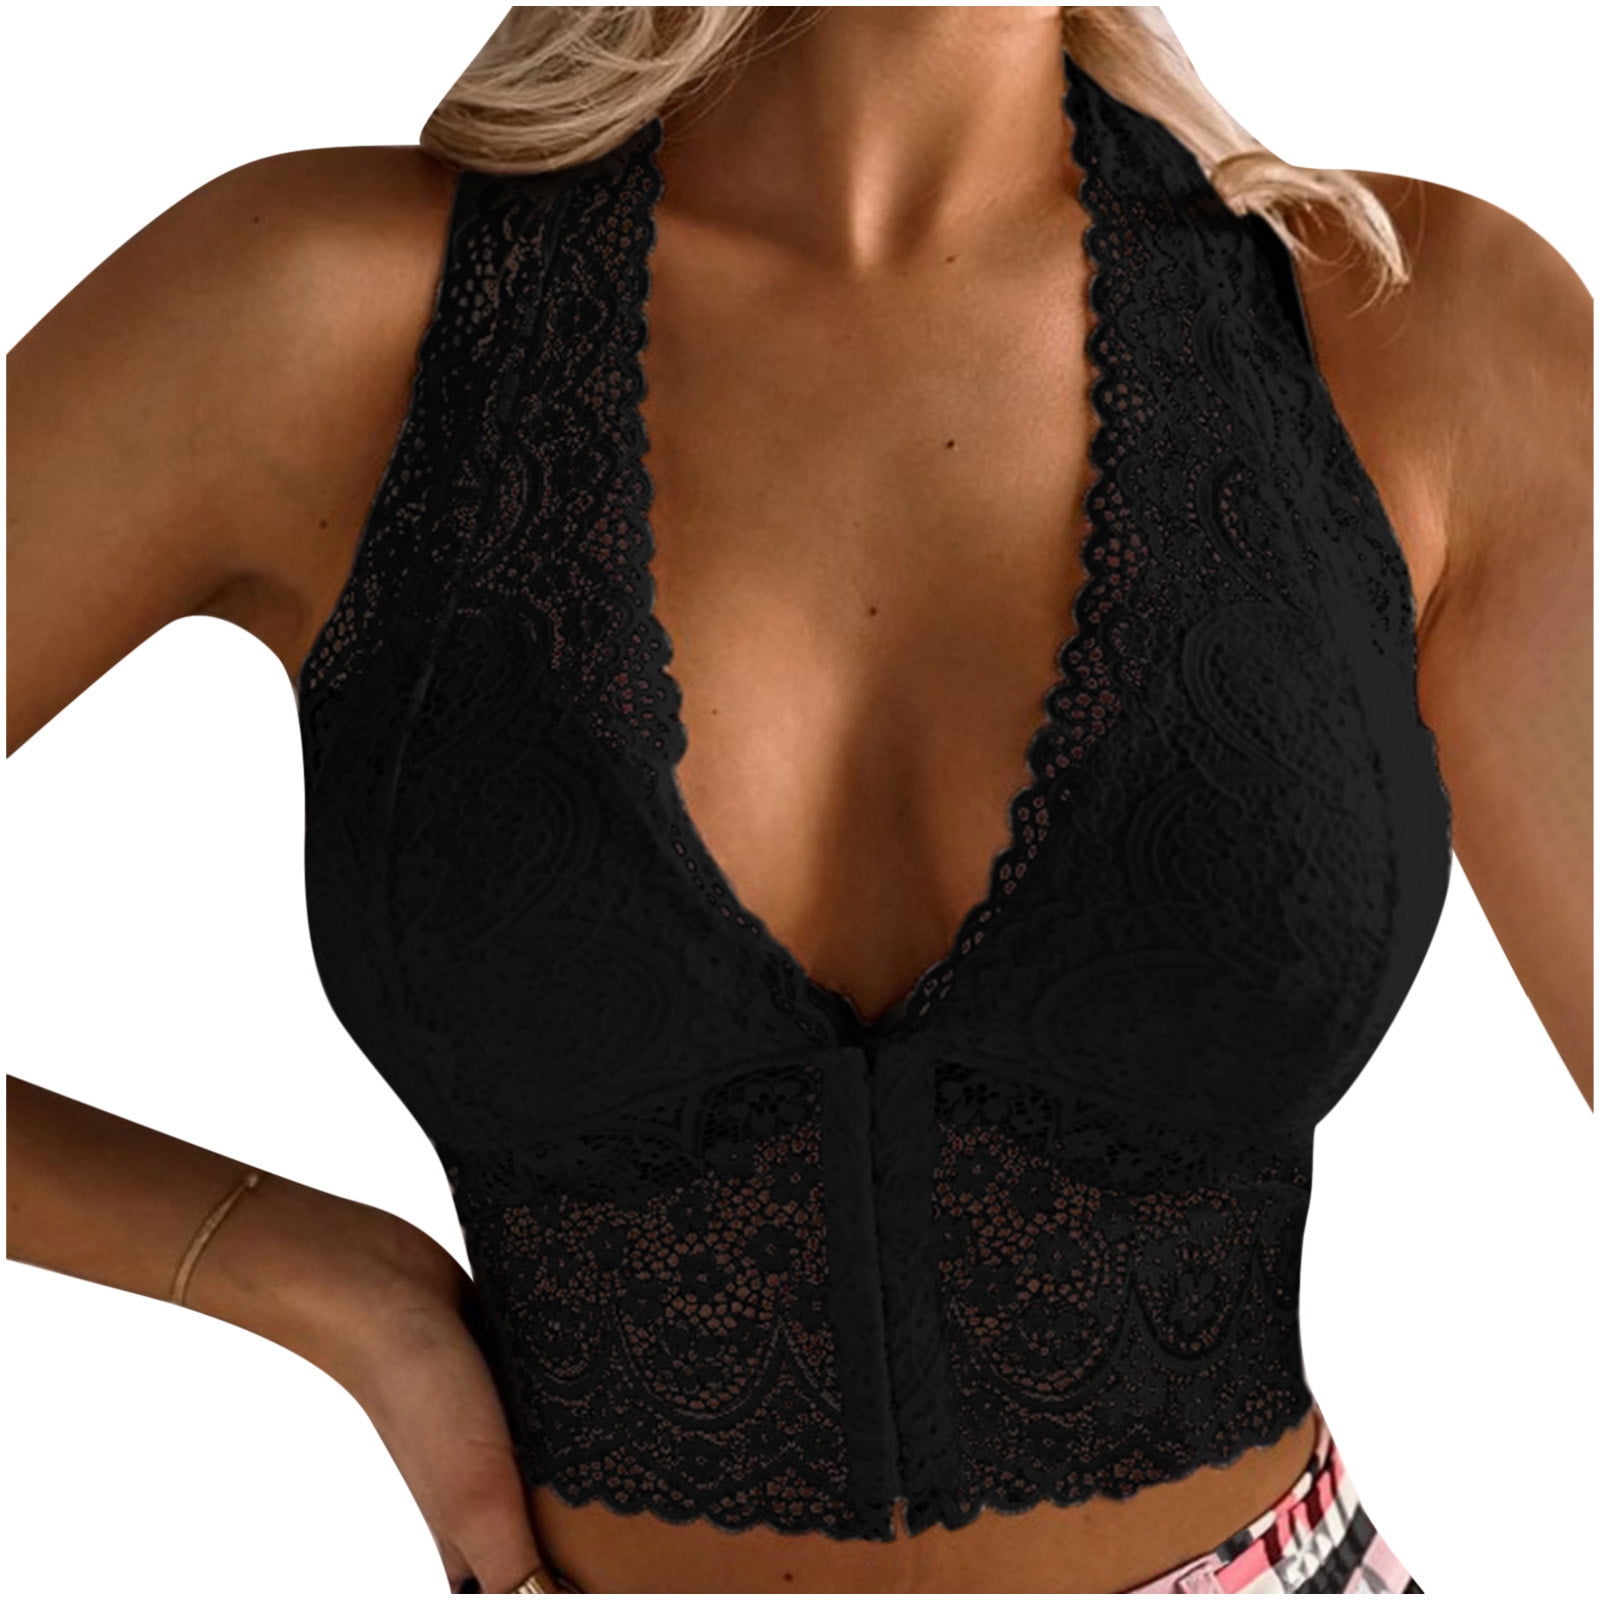 YYDGH Women's High Neck Deep V Lace Bralette Padded Lace Wireless Halter Bra  Hollow Out Floral Crop Top Vest Bra Purple XXL 